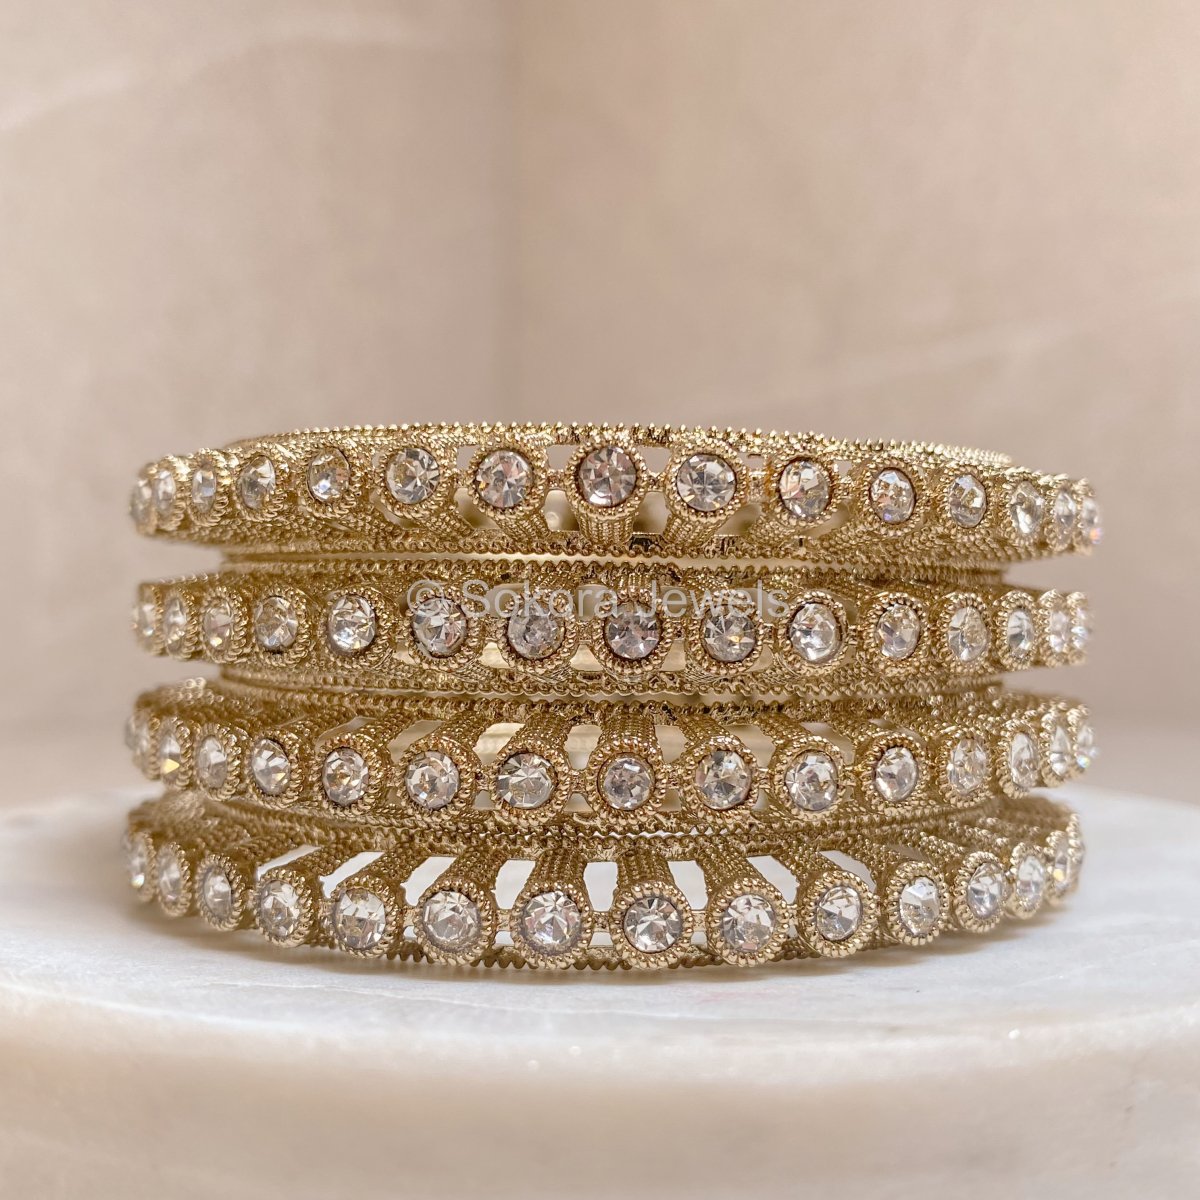 Set of 4 High Gold & Clear Stonework Bangles - SOKORA JEWELSSet of 4 High Gold & Clear Stonework BanglesBANGLES